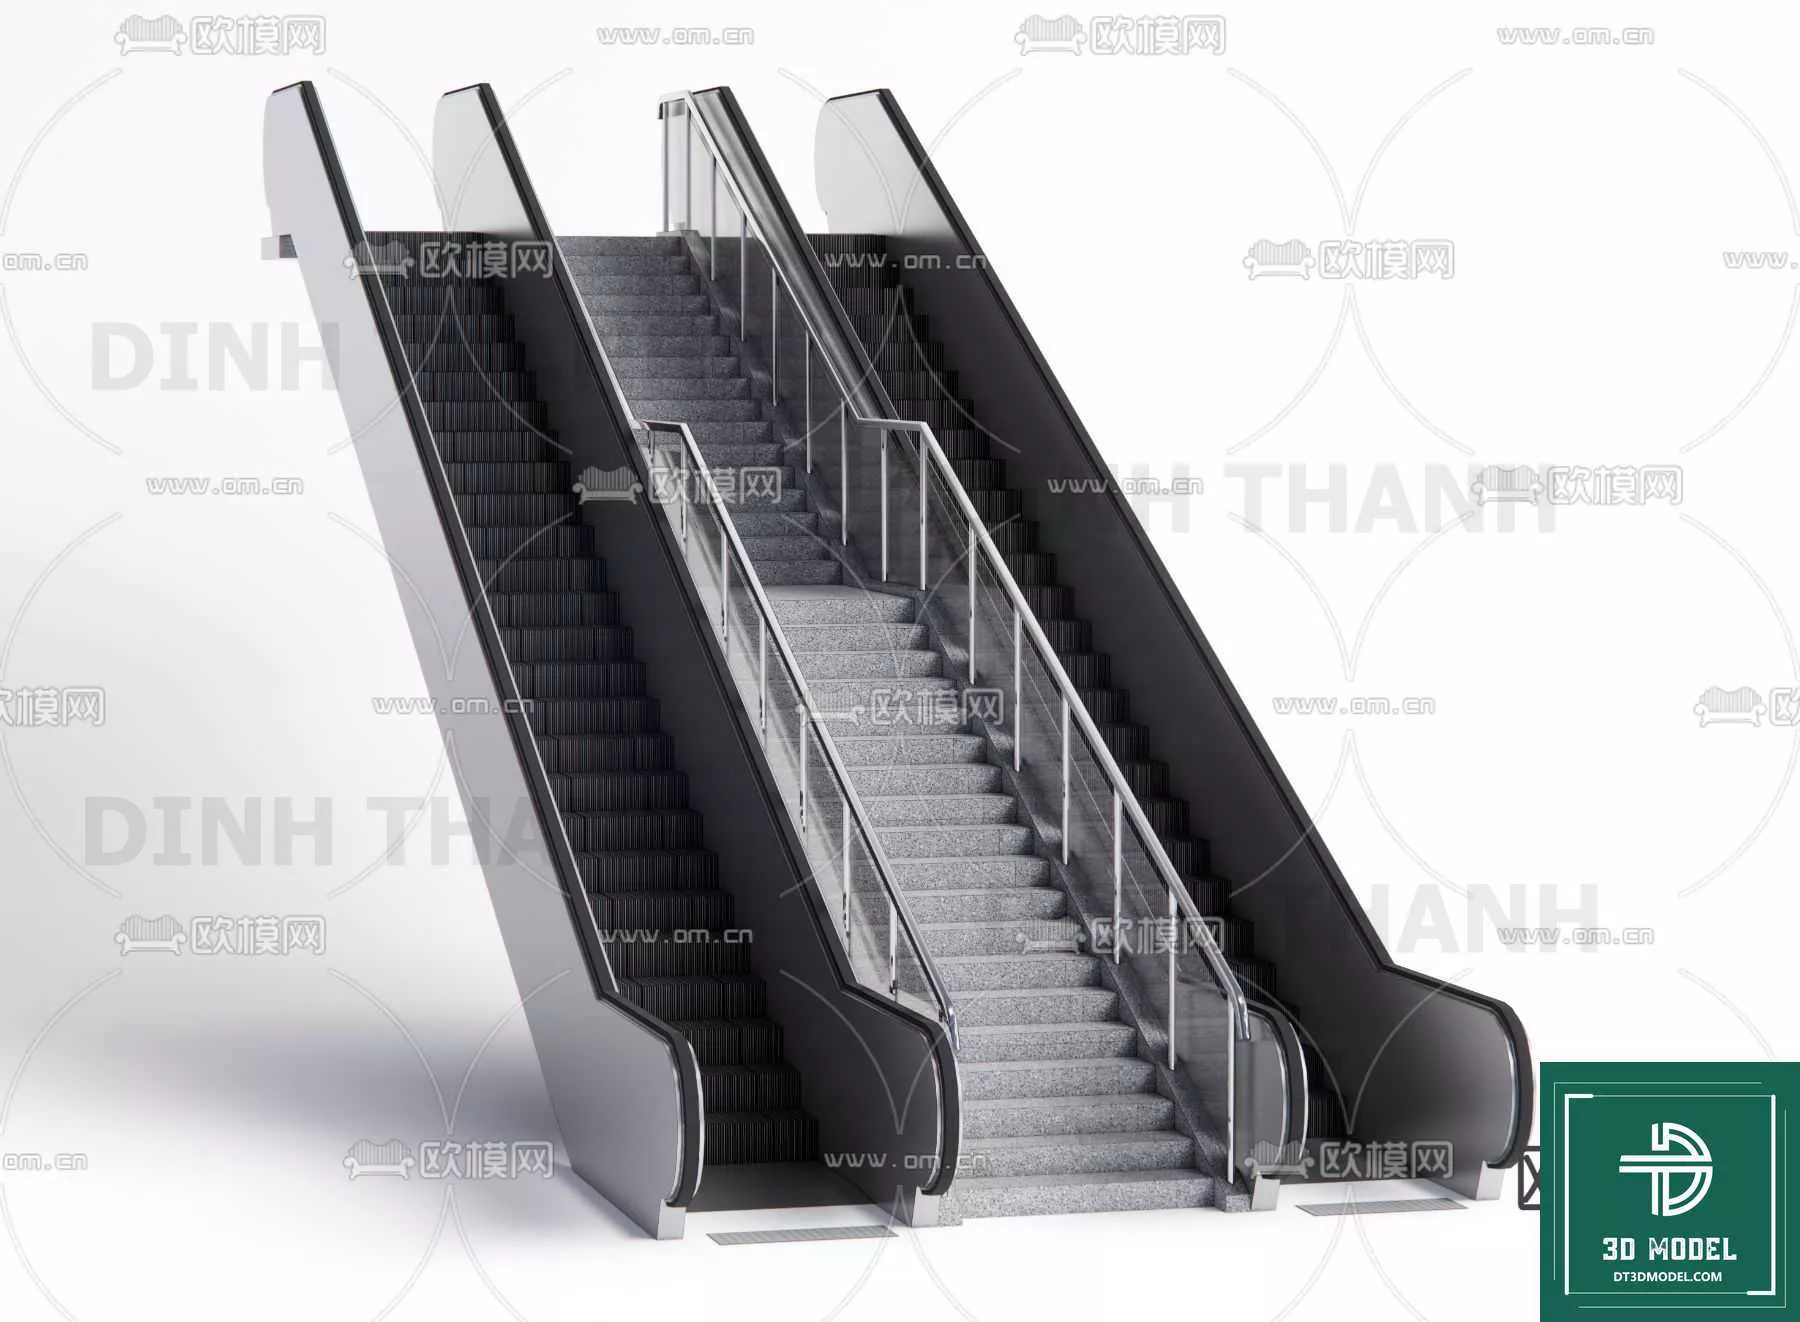 MODERN STAIR - SKETCHUP 3D MODEL - VRAY OR ENSCAPE - ID14266